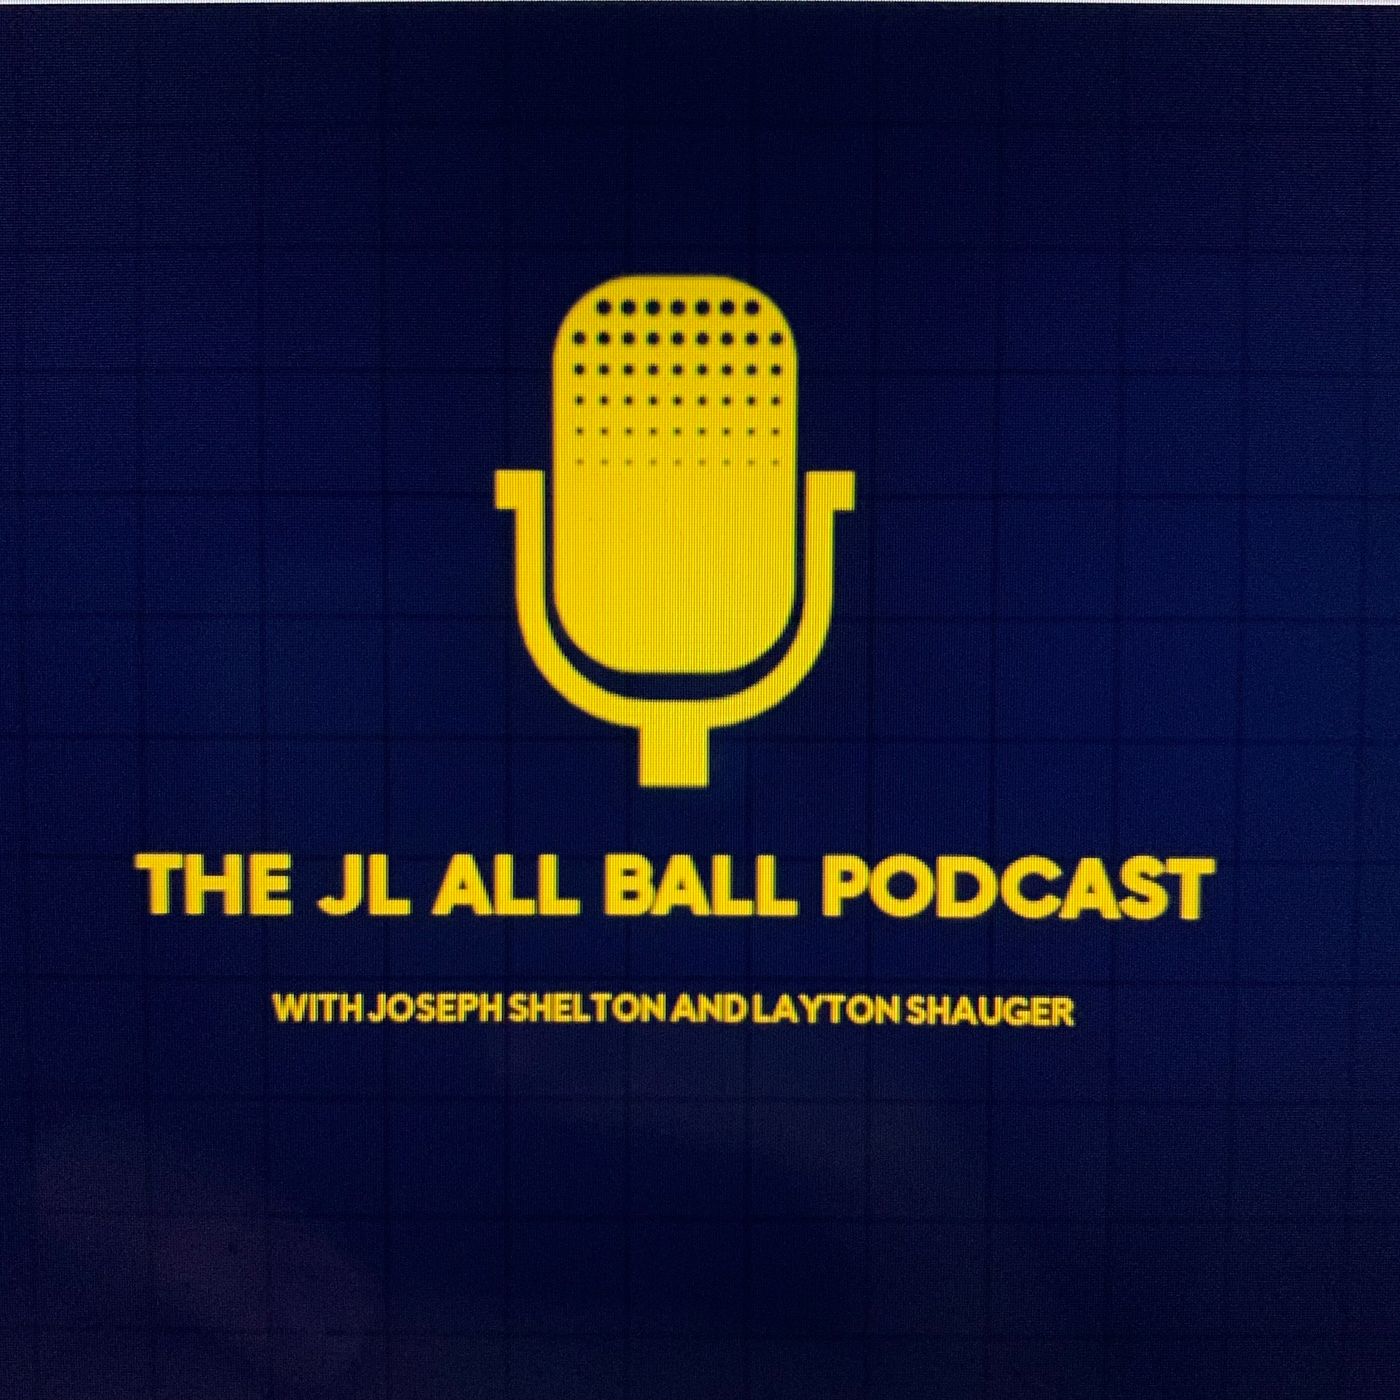 THE JL ALL BALL PODCAST